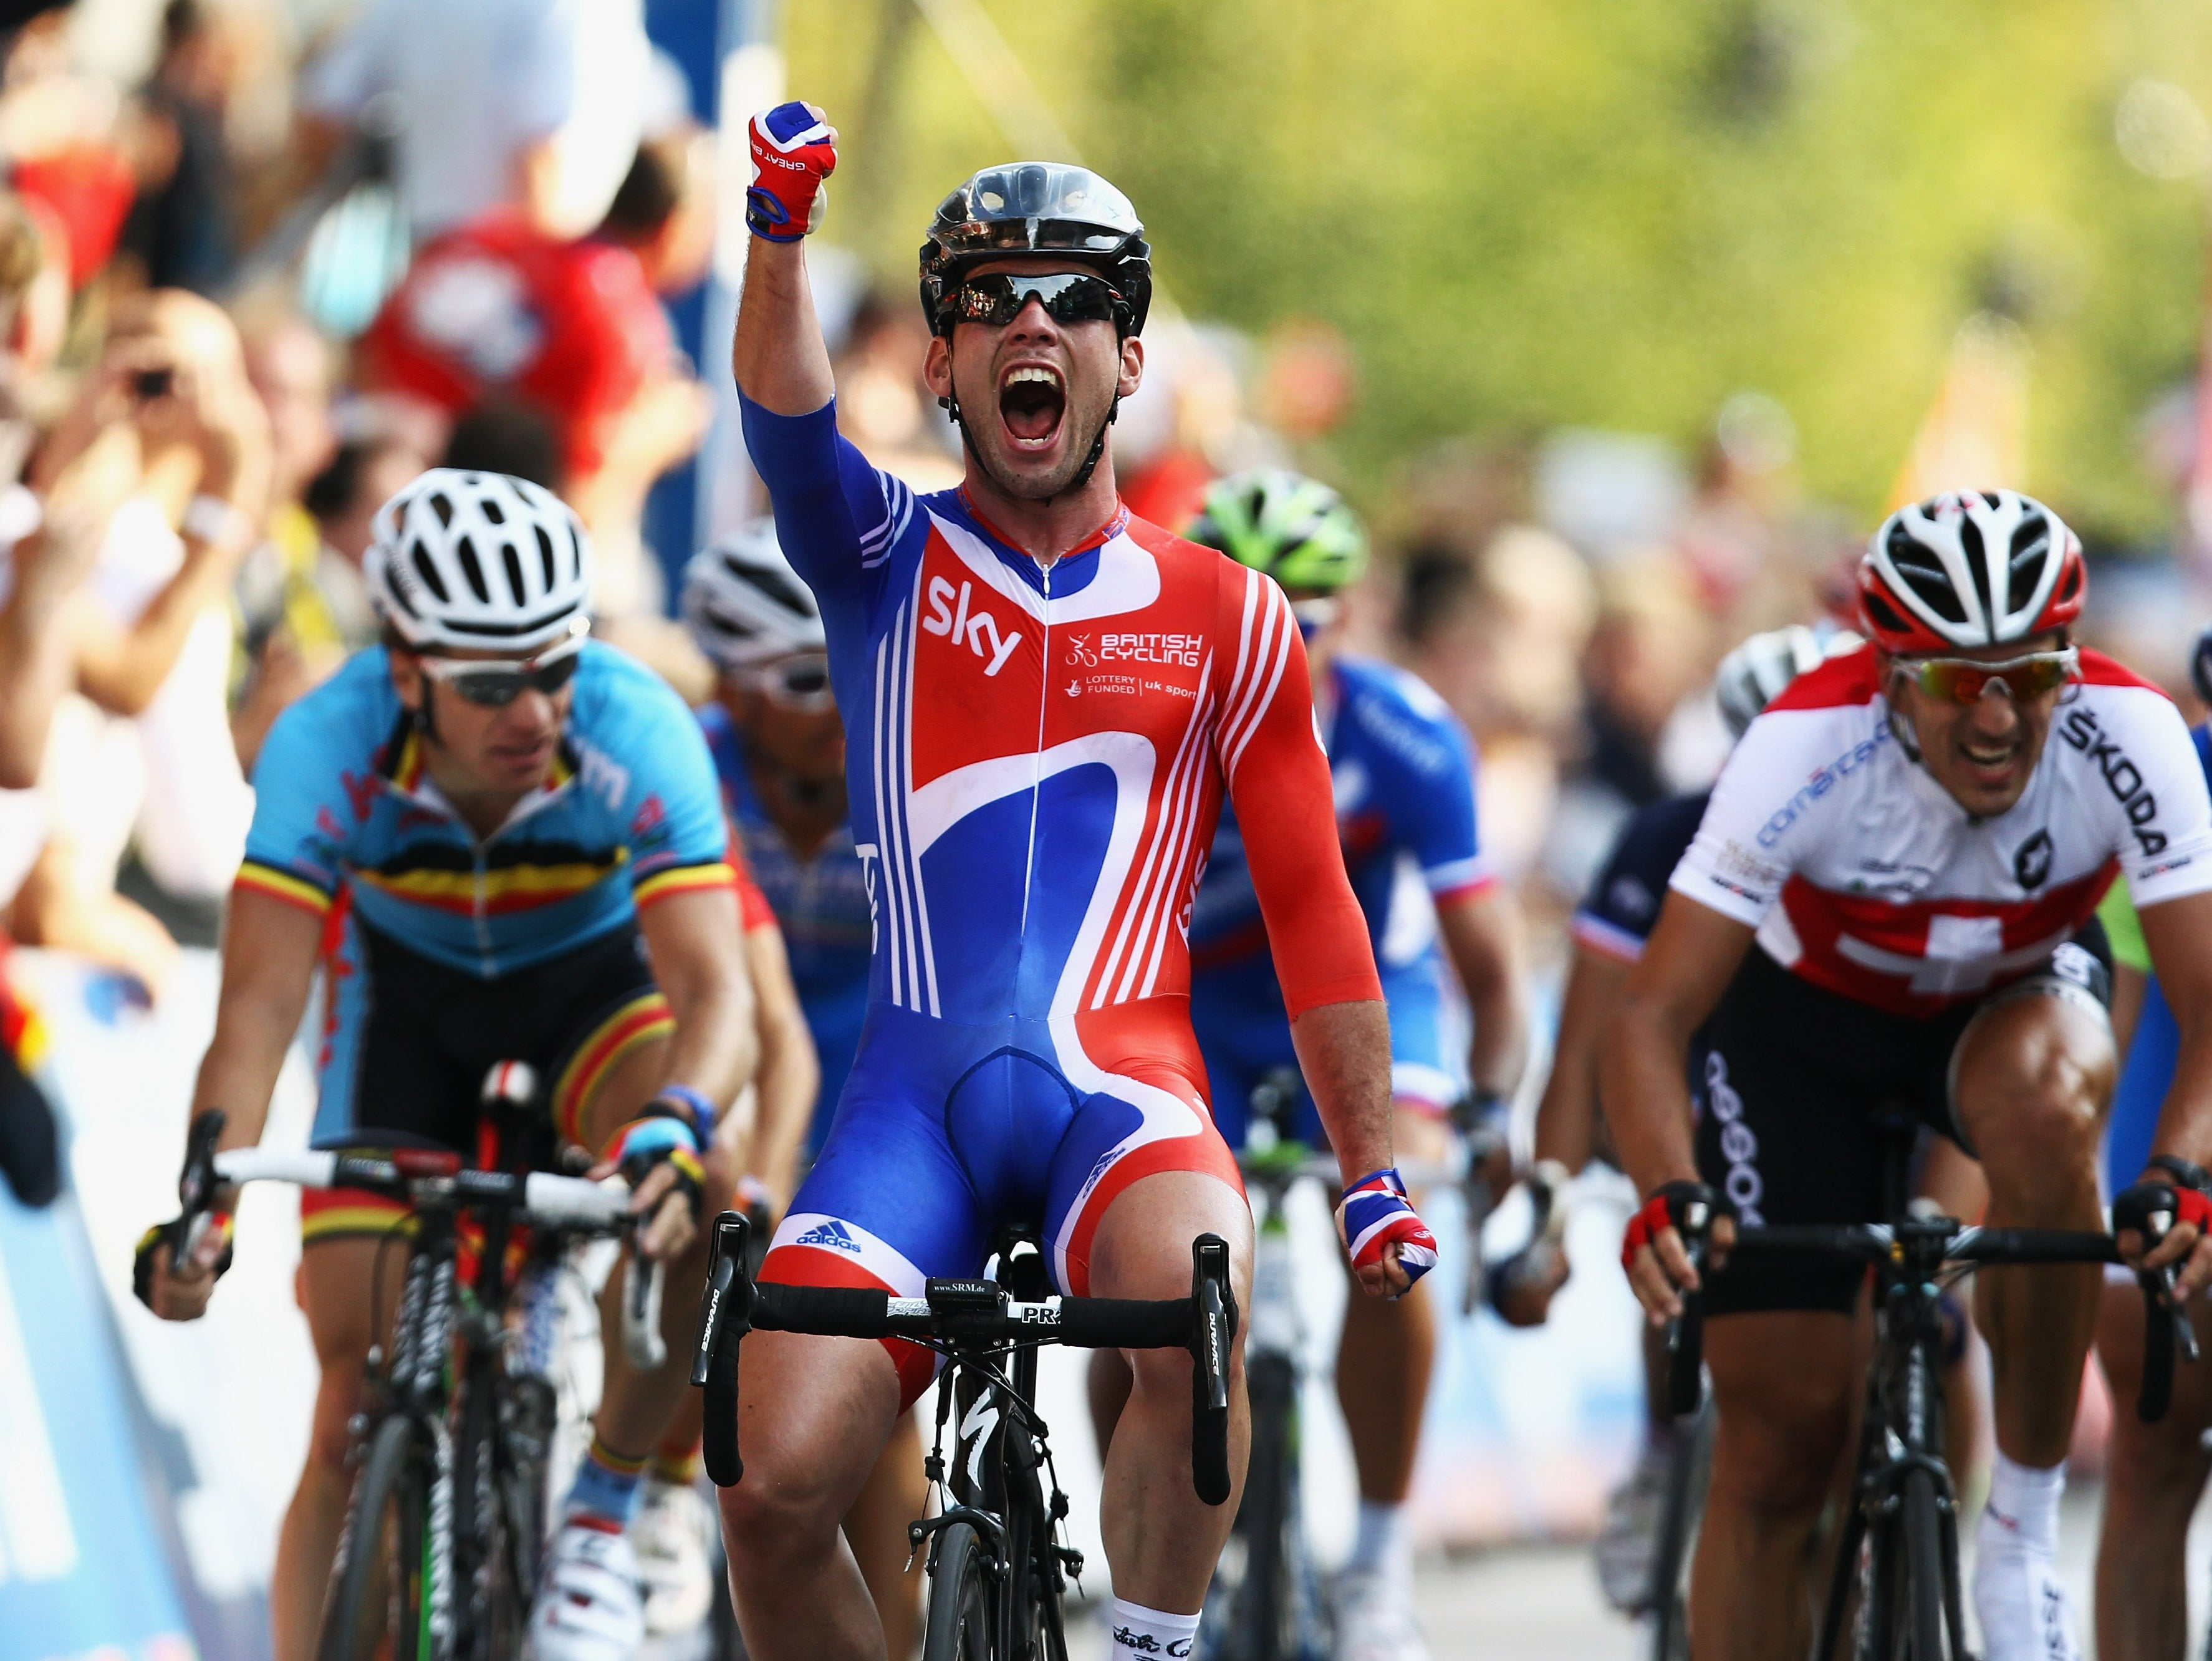 Mark Cavendish has cemented his place as cycling’s greatest sprinter